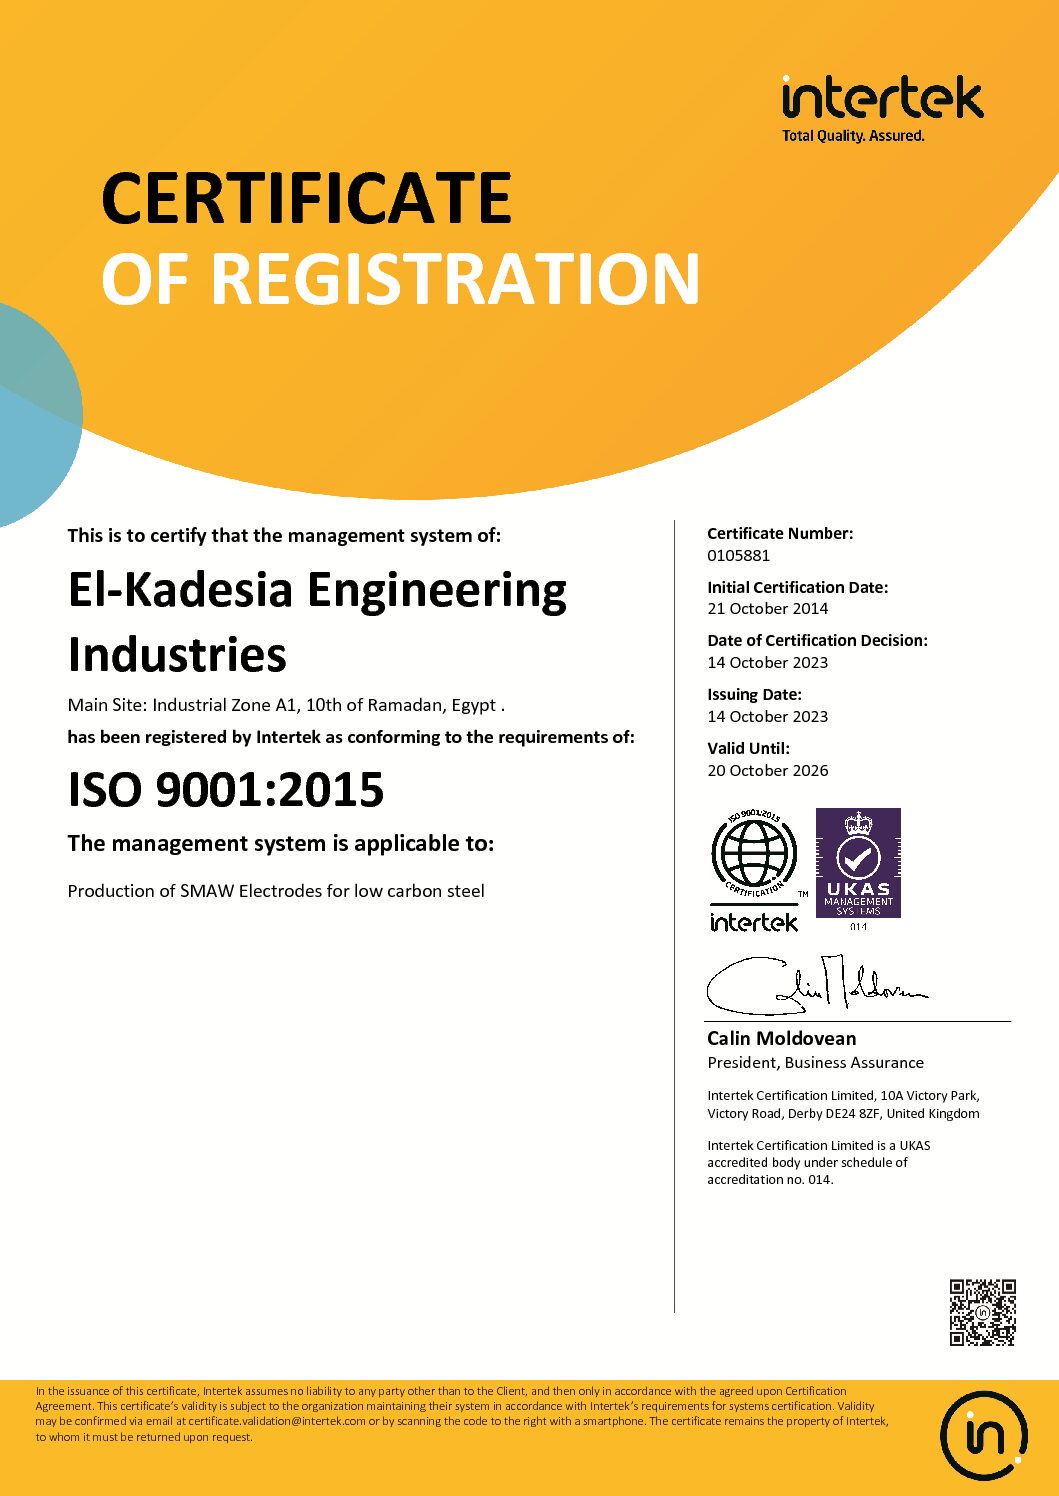 ISO 9001 Certificate